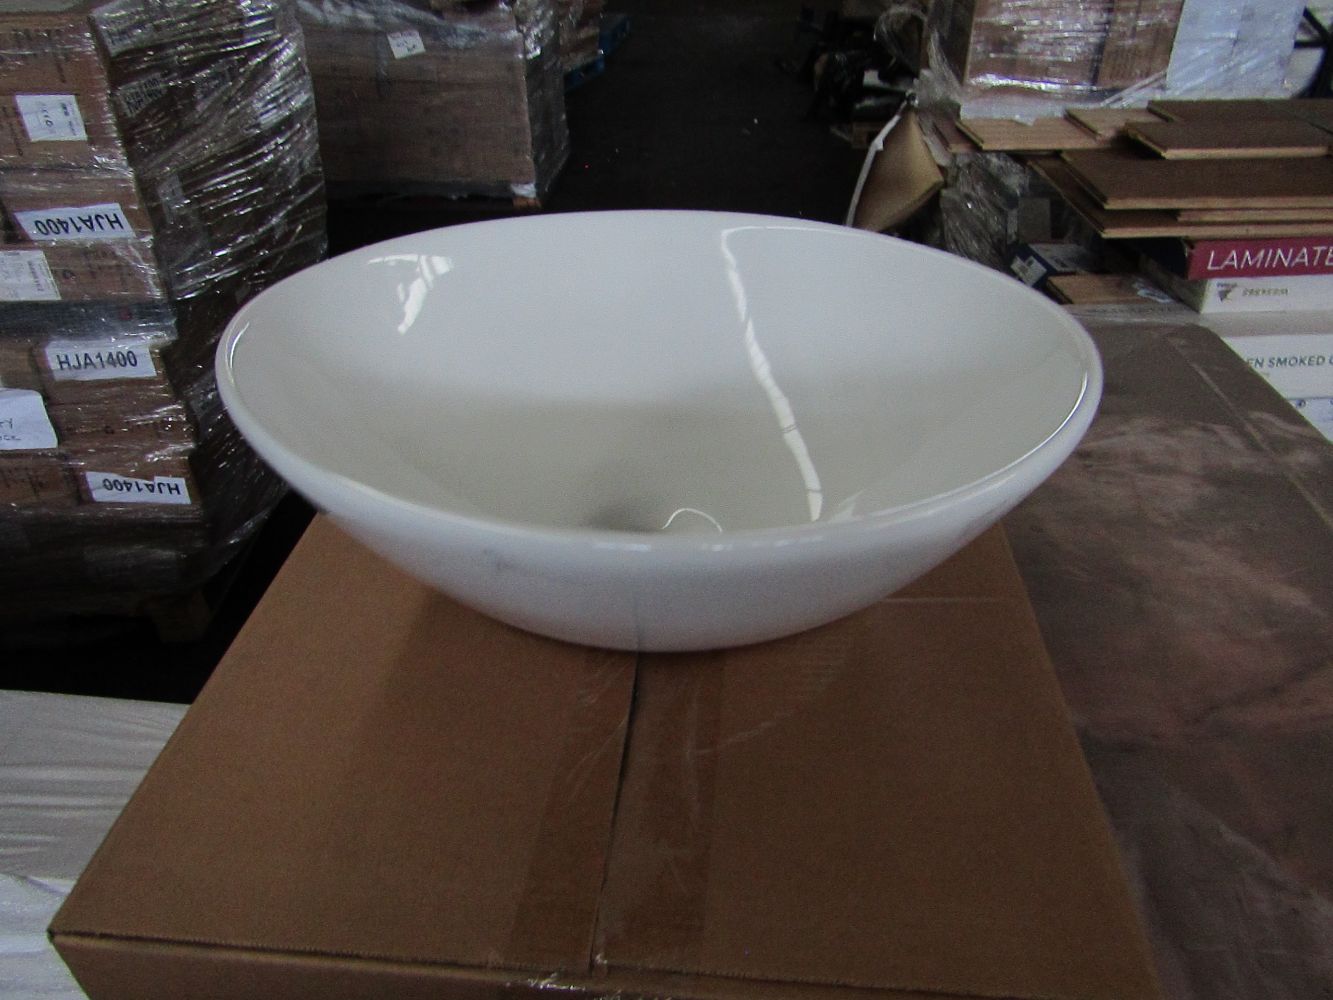 Pallets of Sinks, Cisterns, Radiators and Bathroom Stock up to 90% off retail prices